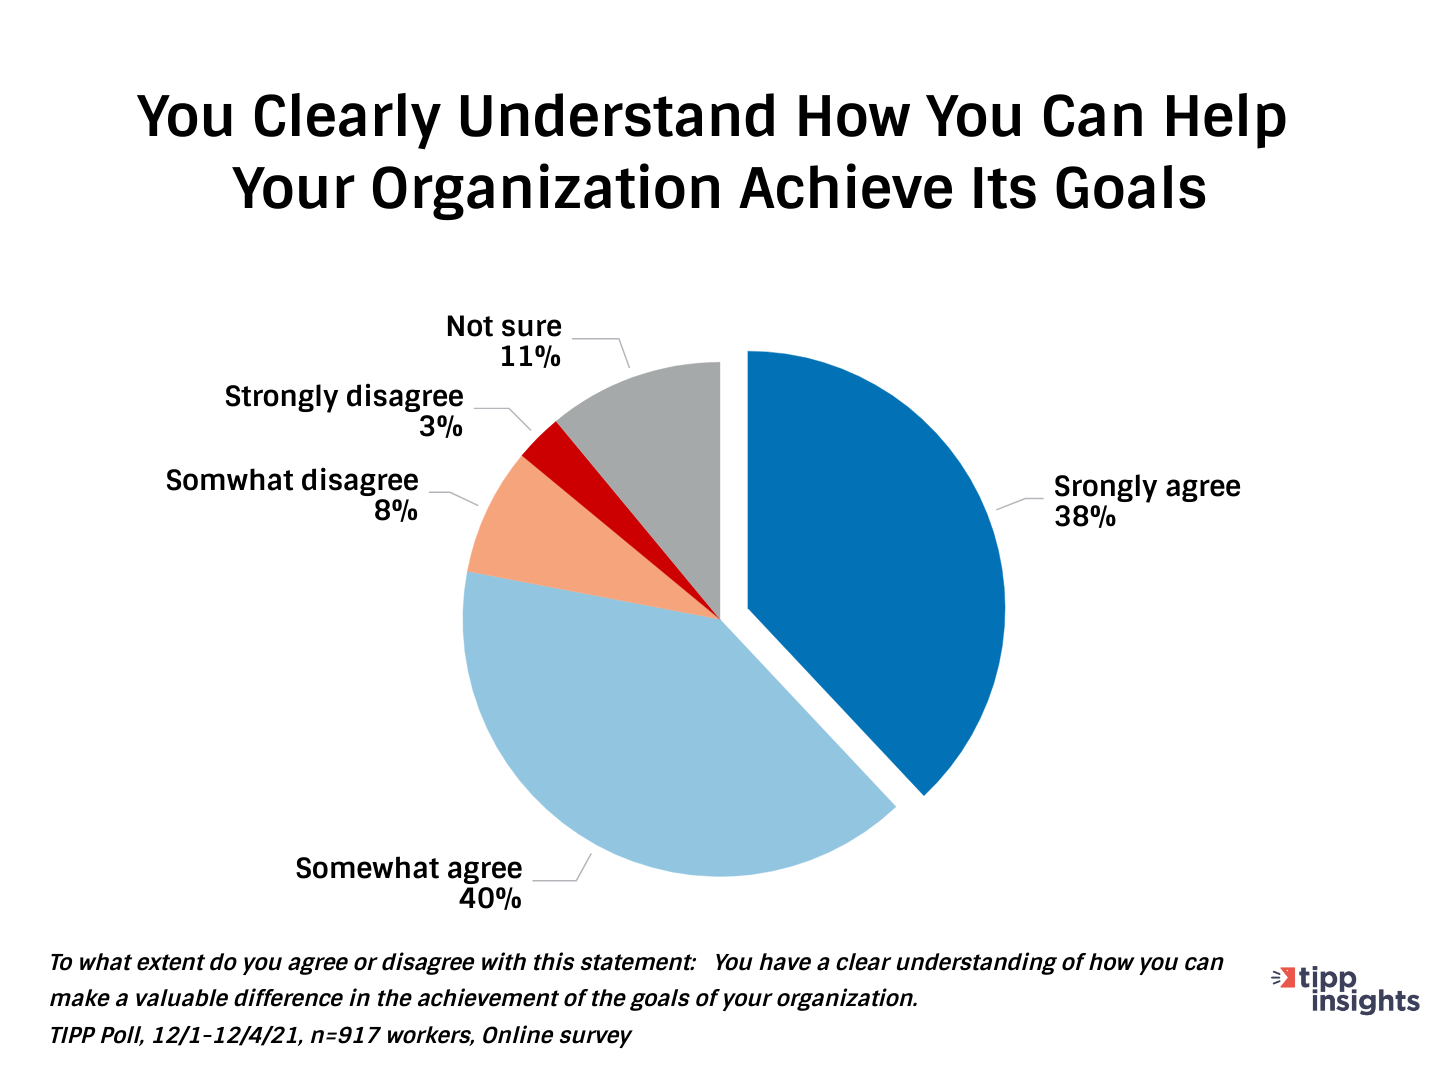 TIPP Poll Results: Understanding how you can help your organization achieve its goals